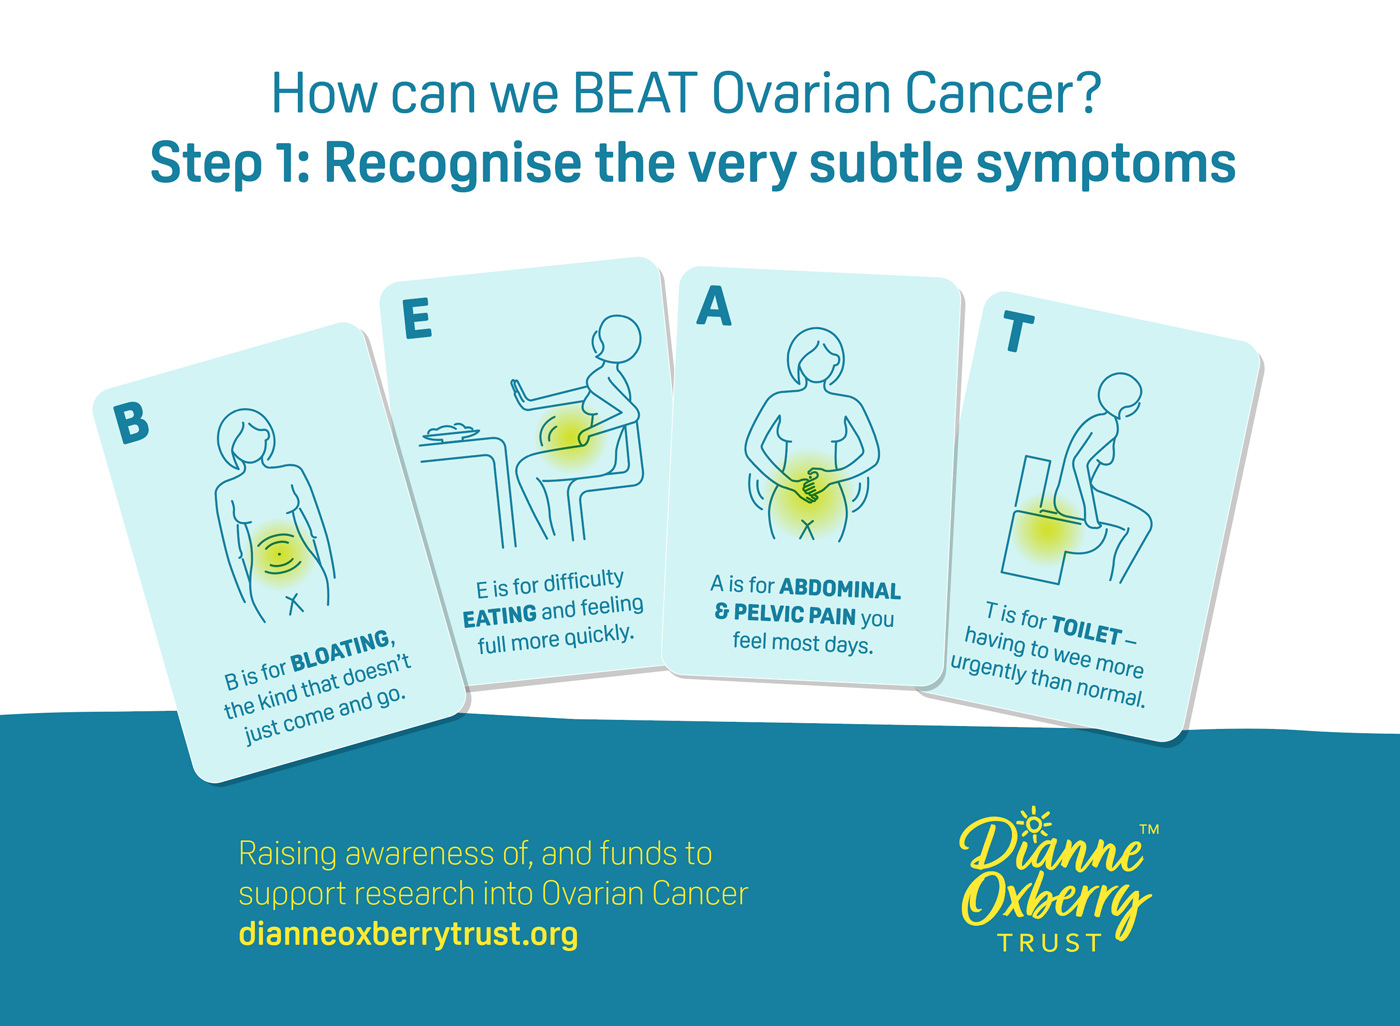 Cards showing the symptoms of ovarian cancer